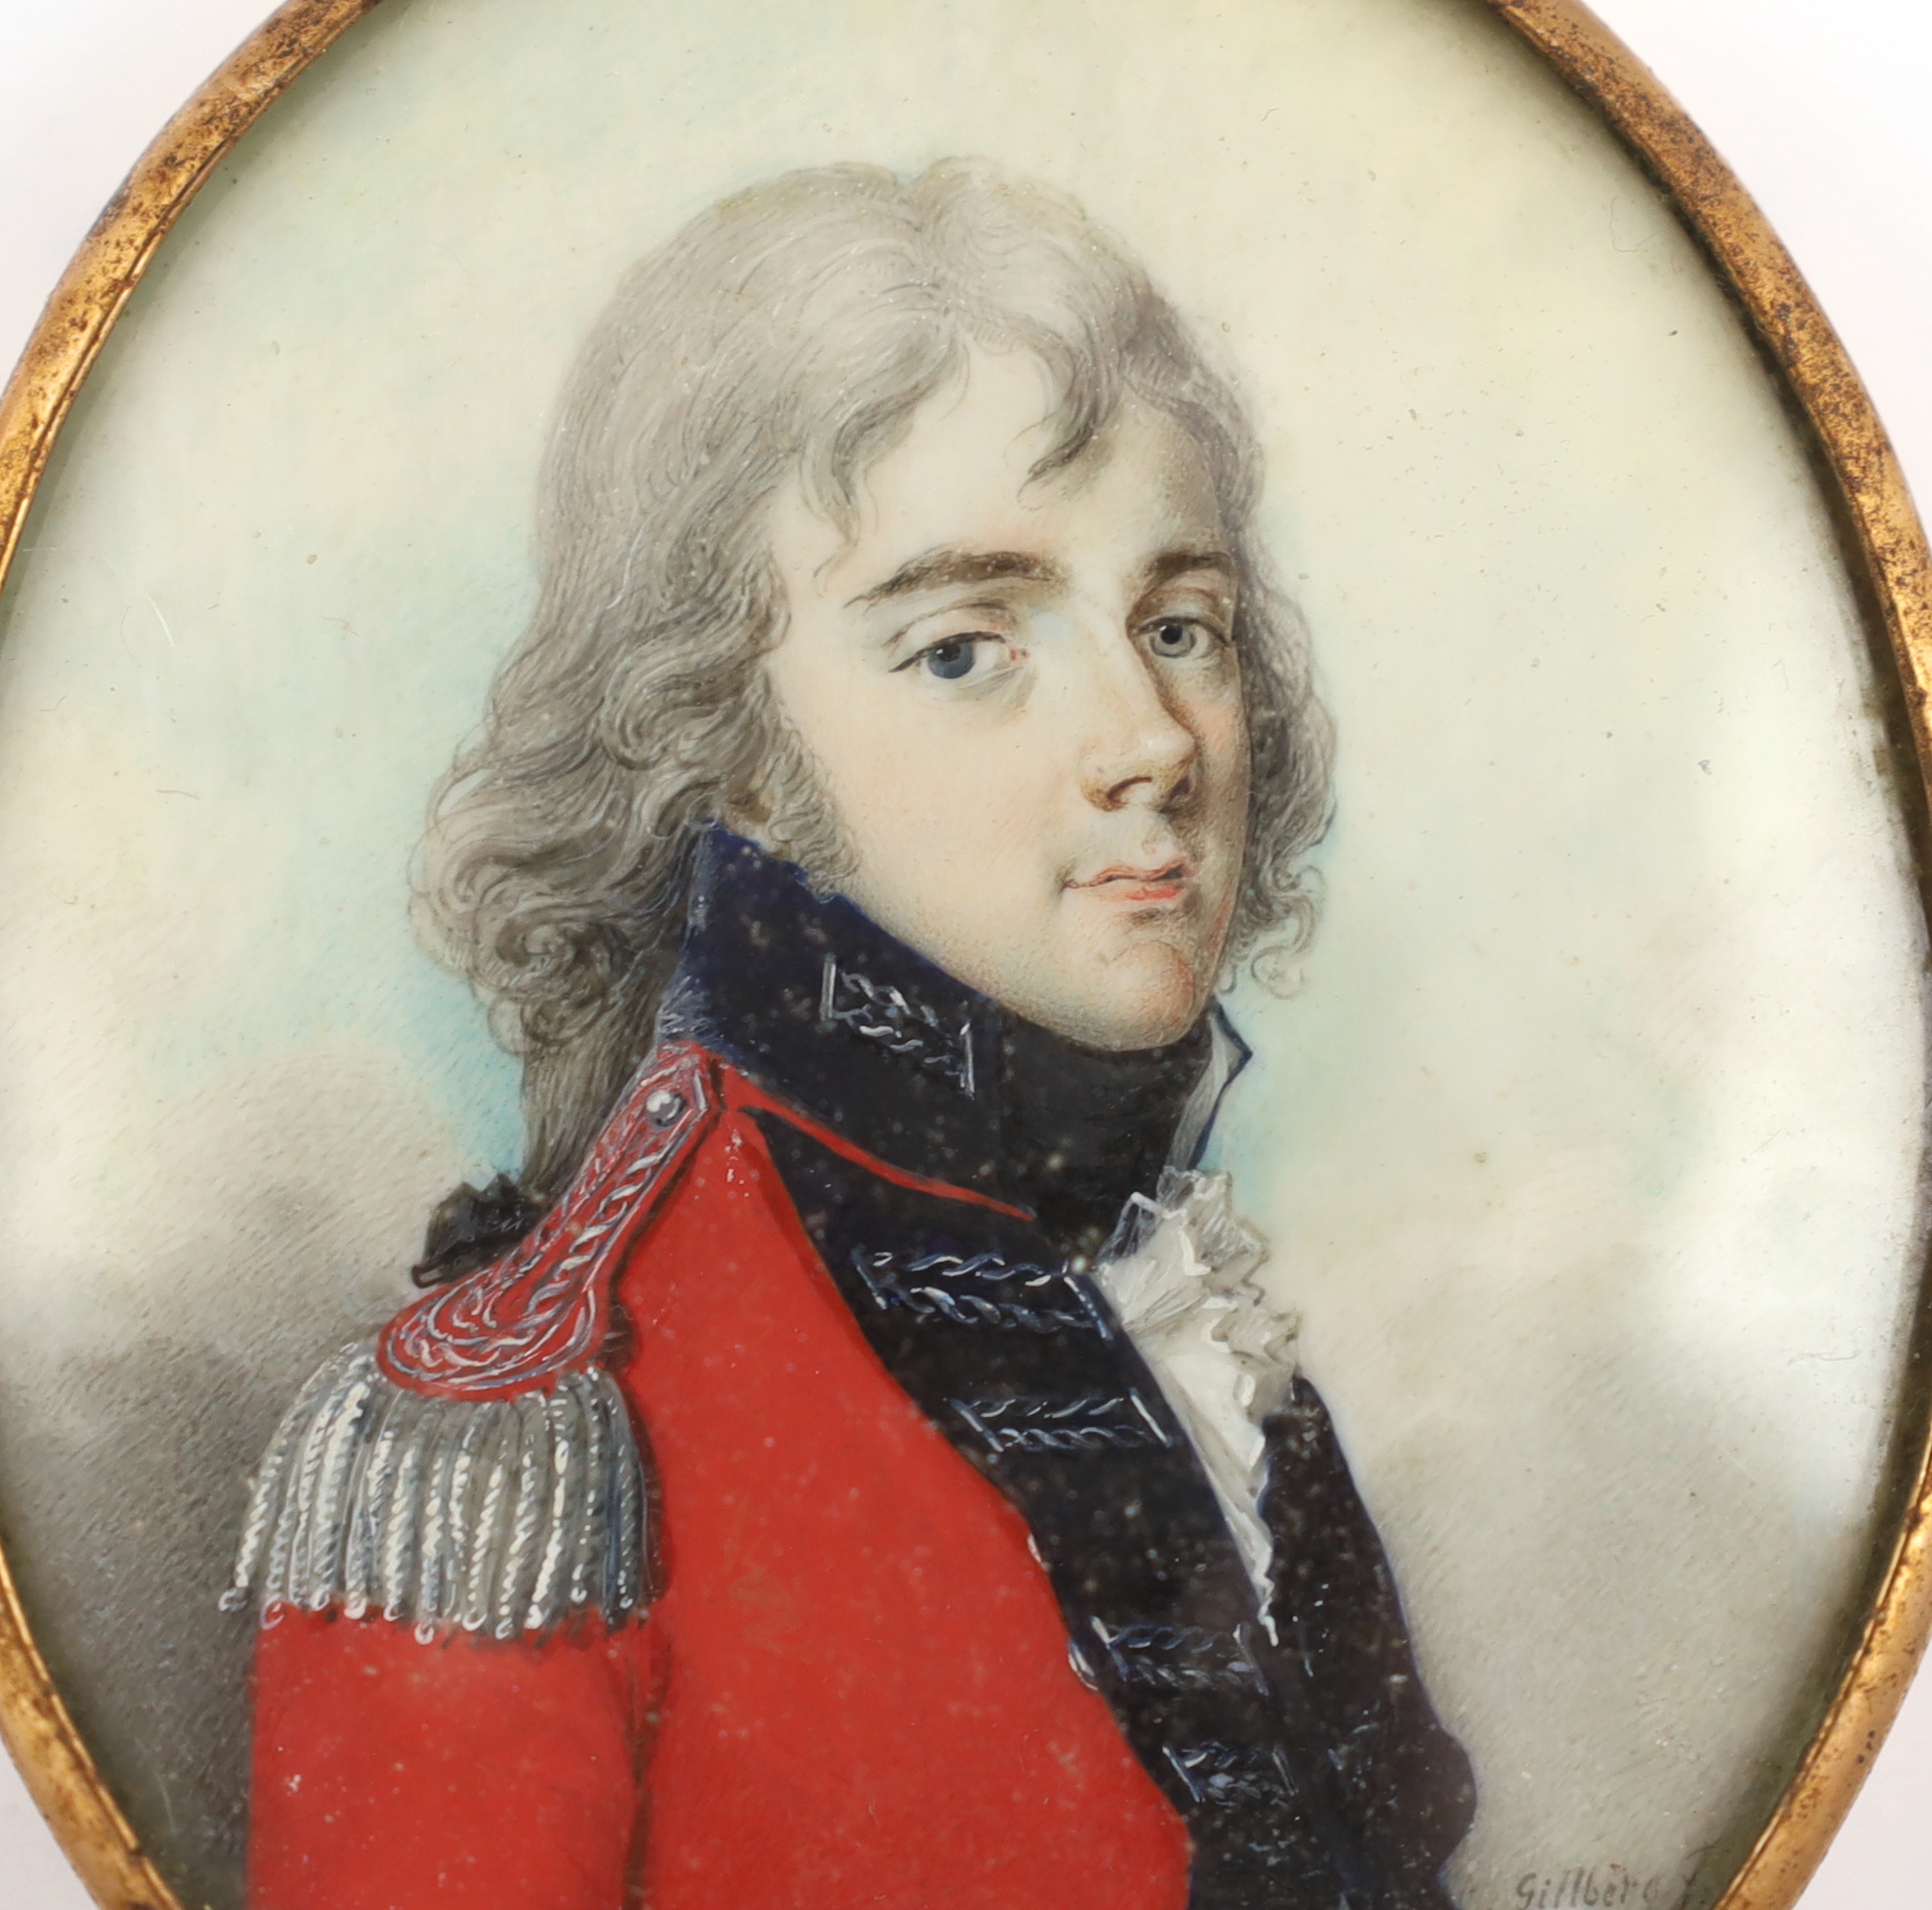 Jacob Axel Gillberg (Swedish, 1769-1845), Portrait miniature of an army officer, watercolour on ivory, 7.3 x 6cm. CITES Submission reference 5V74WA8F